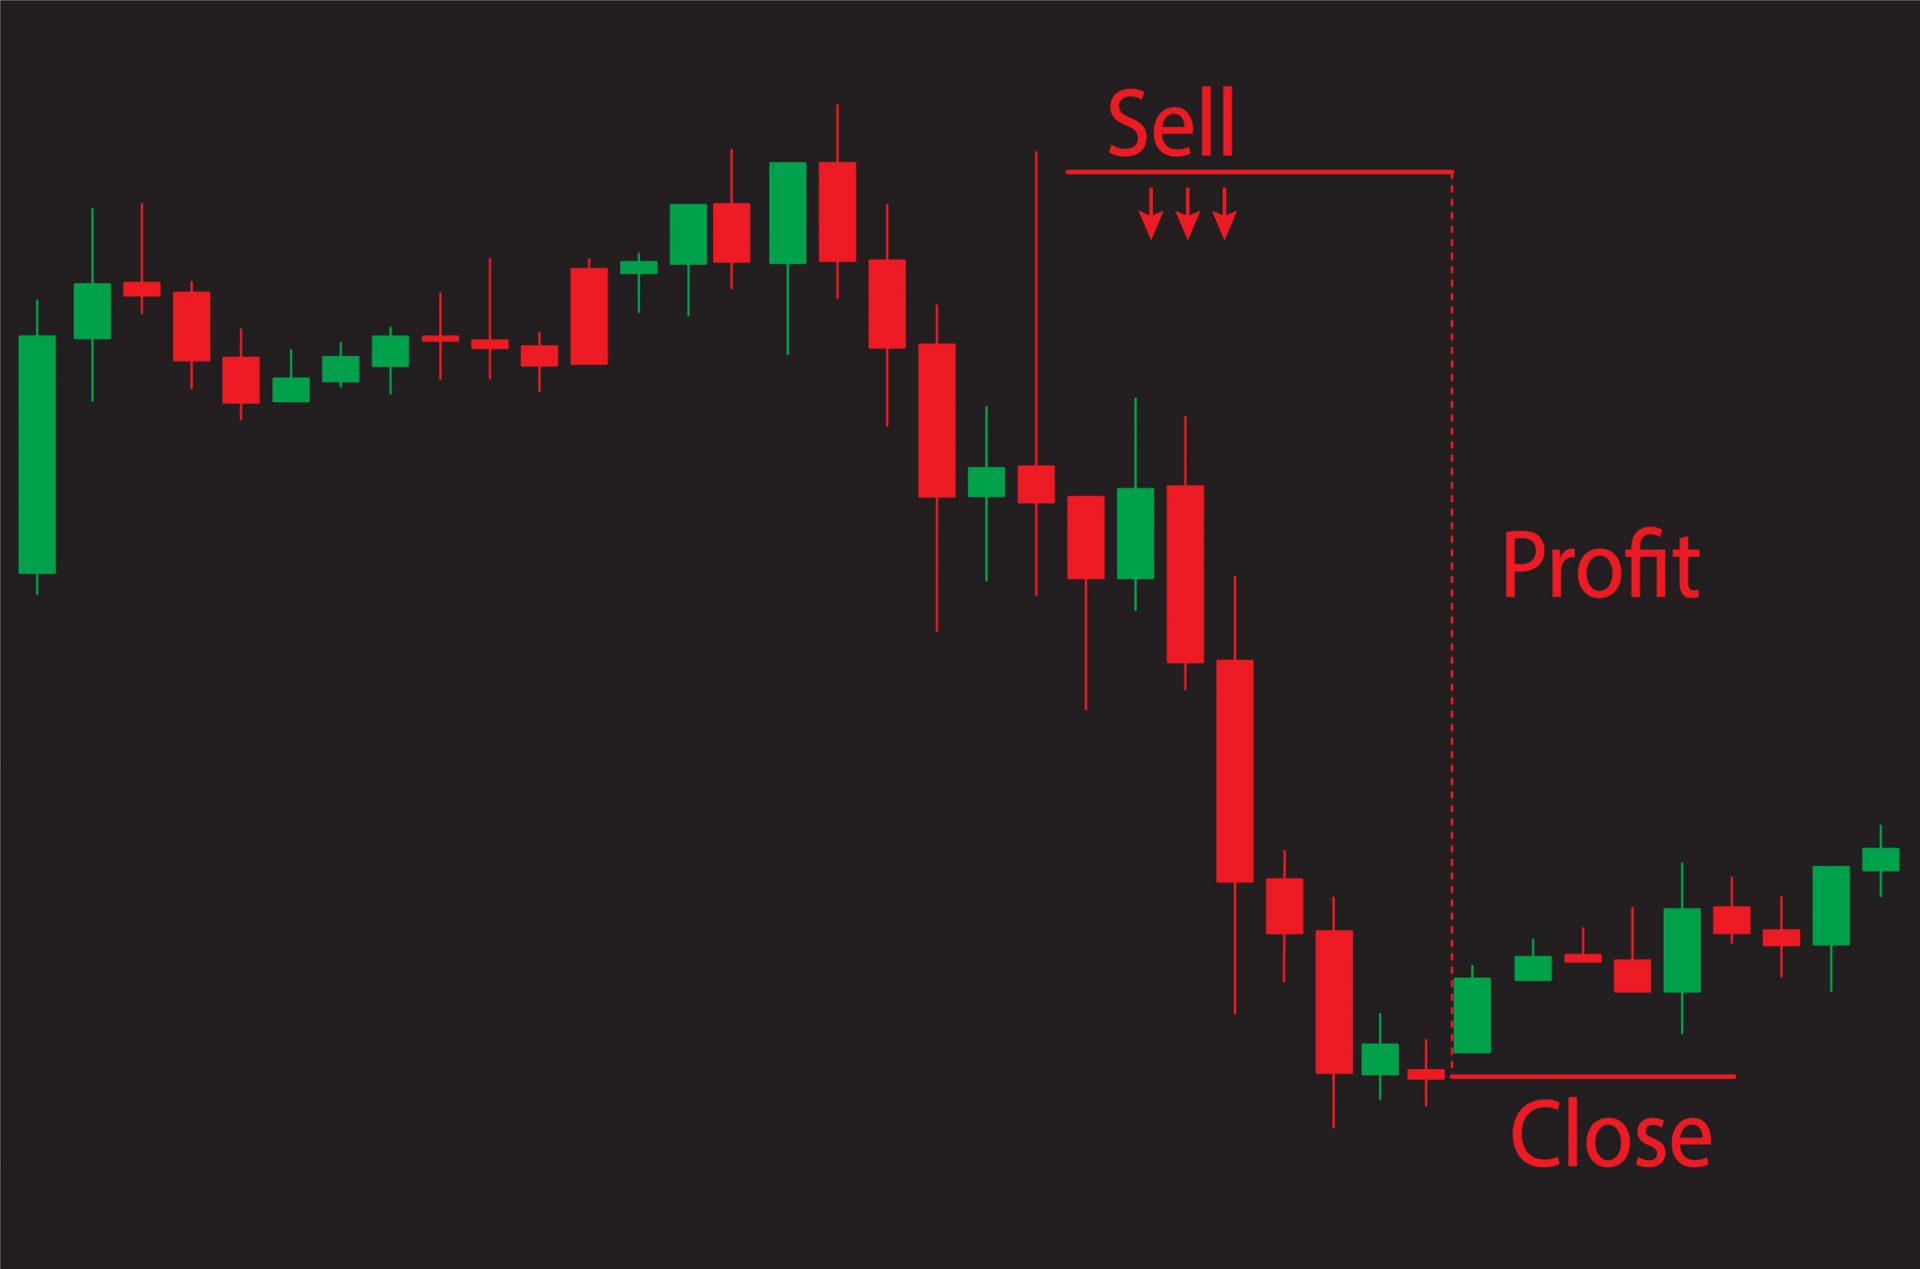 Japanese candlestick red and green chart showing downtrend market on black background with short trade